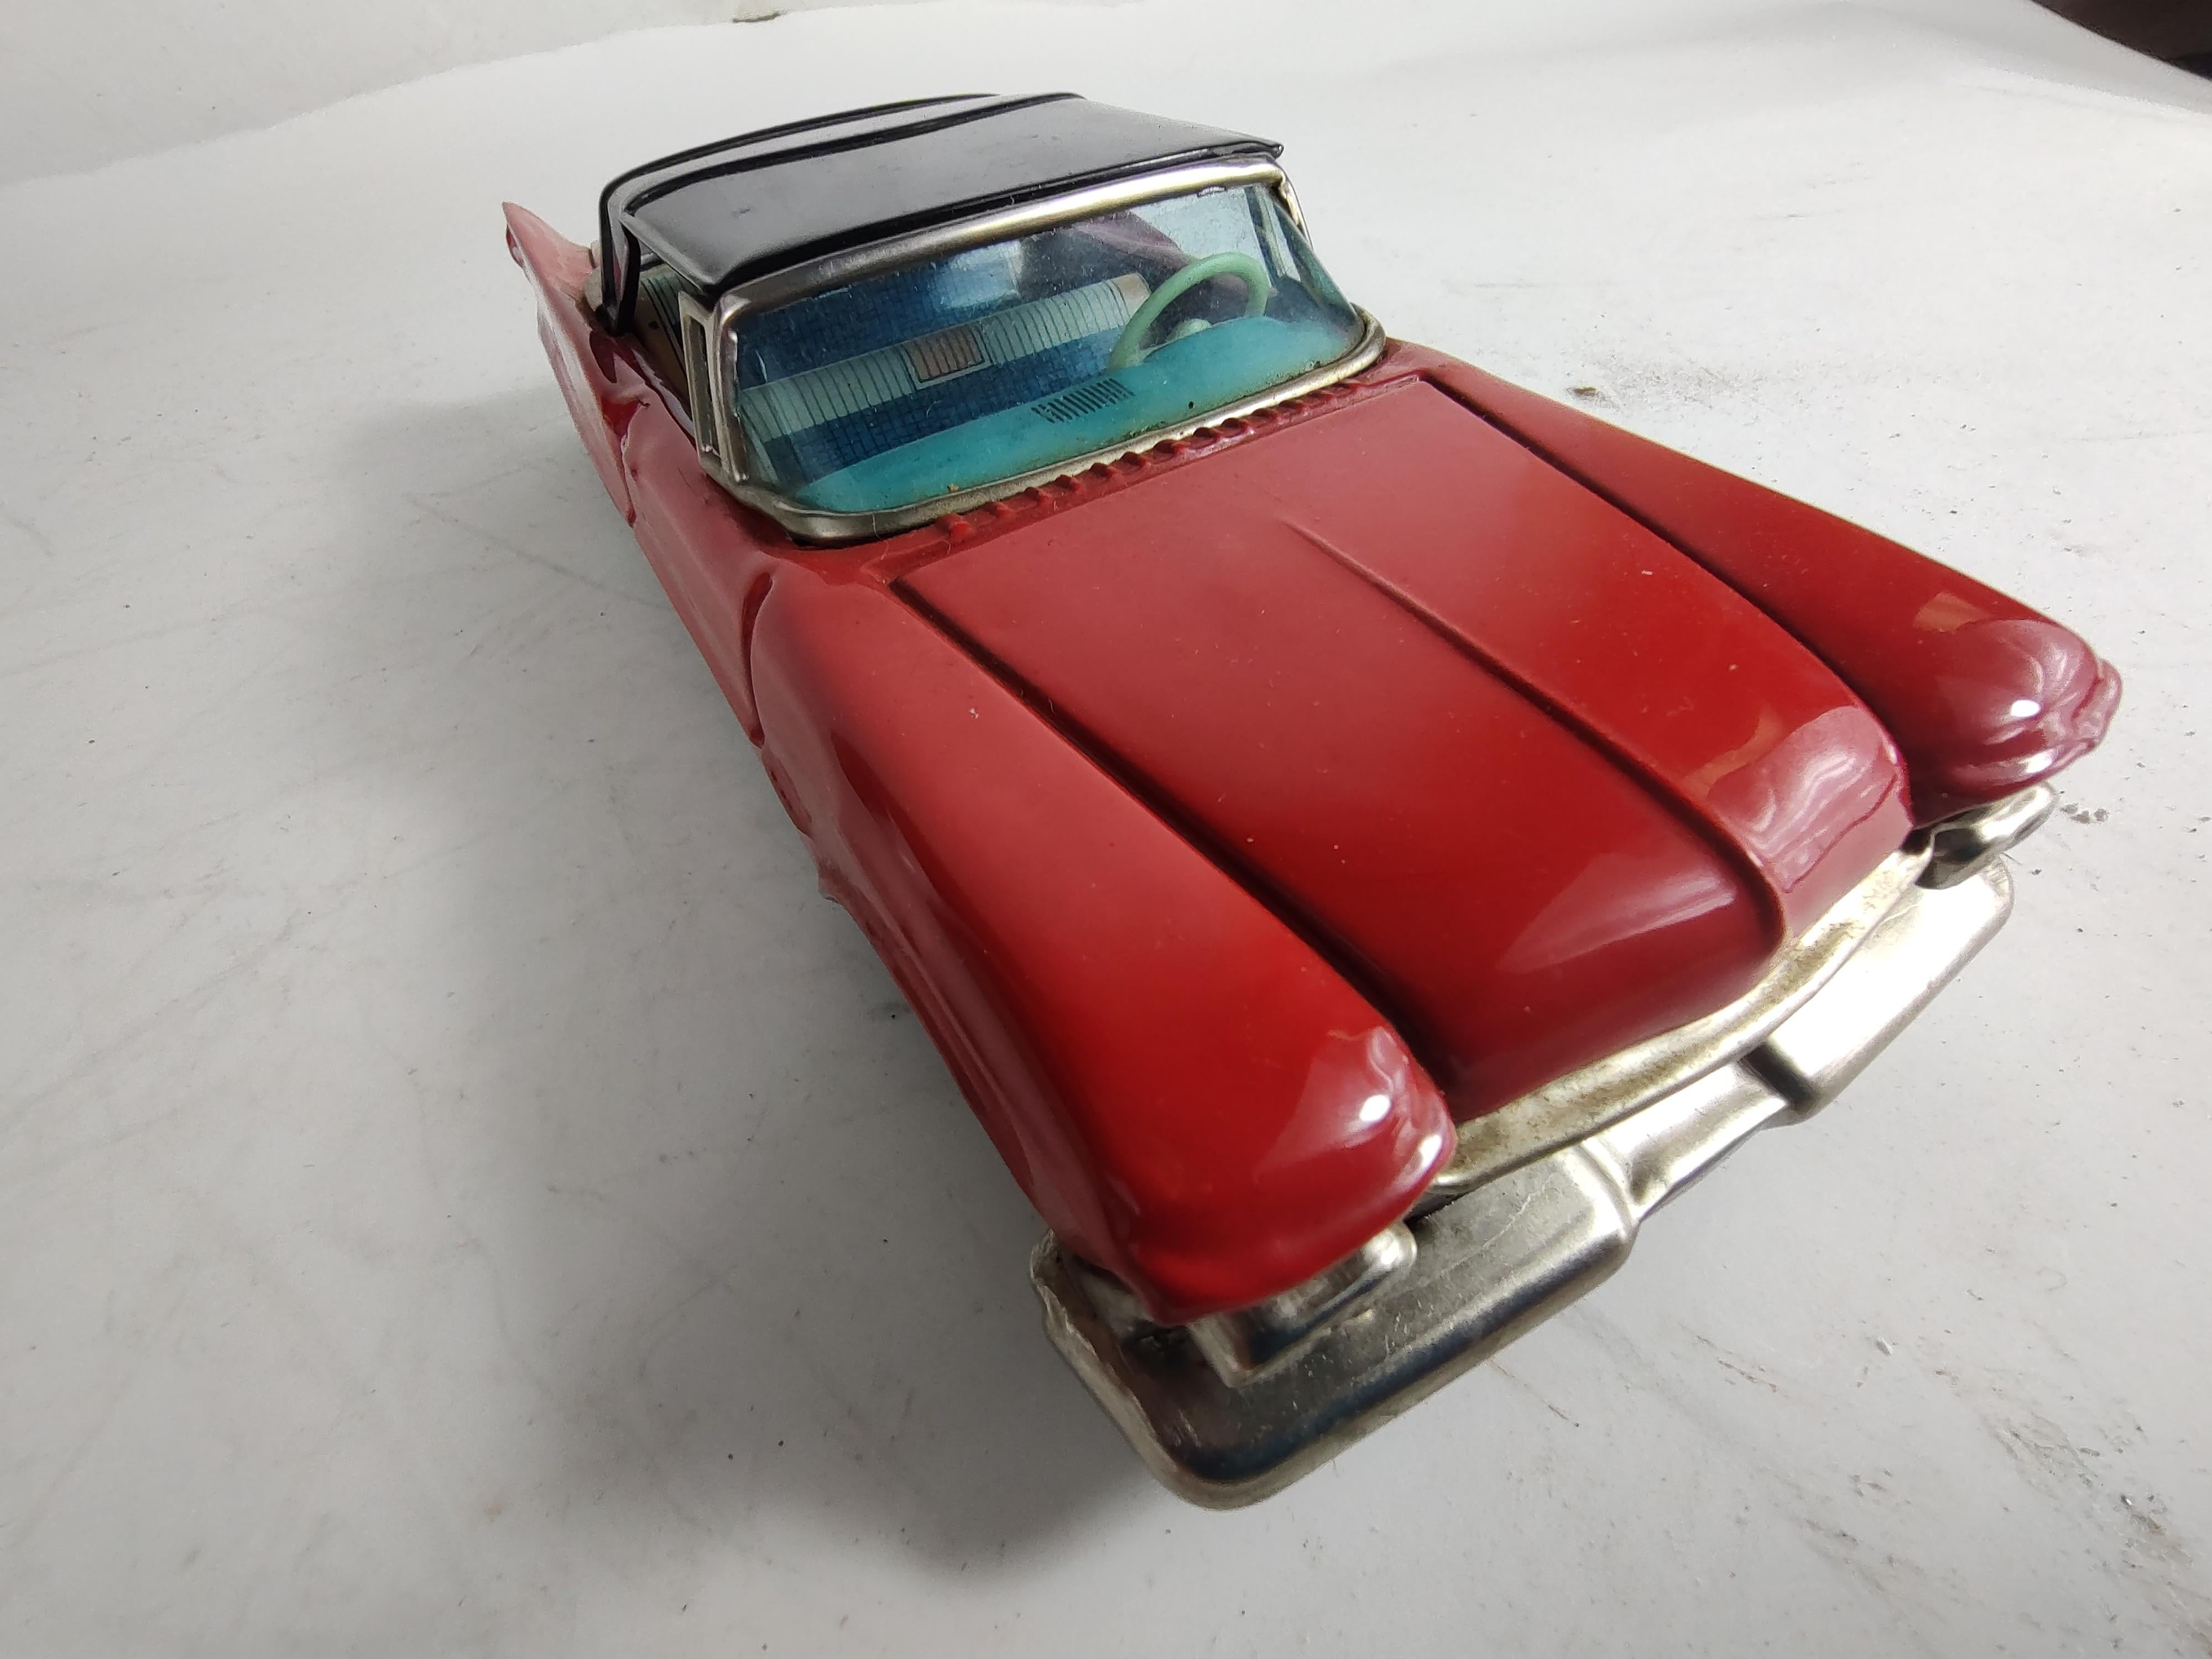 Midcentury Tin Litho Toy Car by Bandai Japan 1959 Chrysler Imperial in Red Black 1